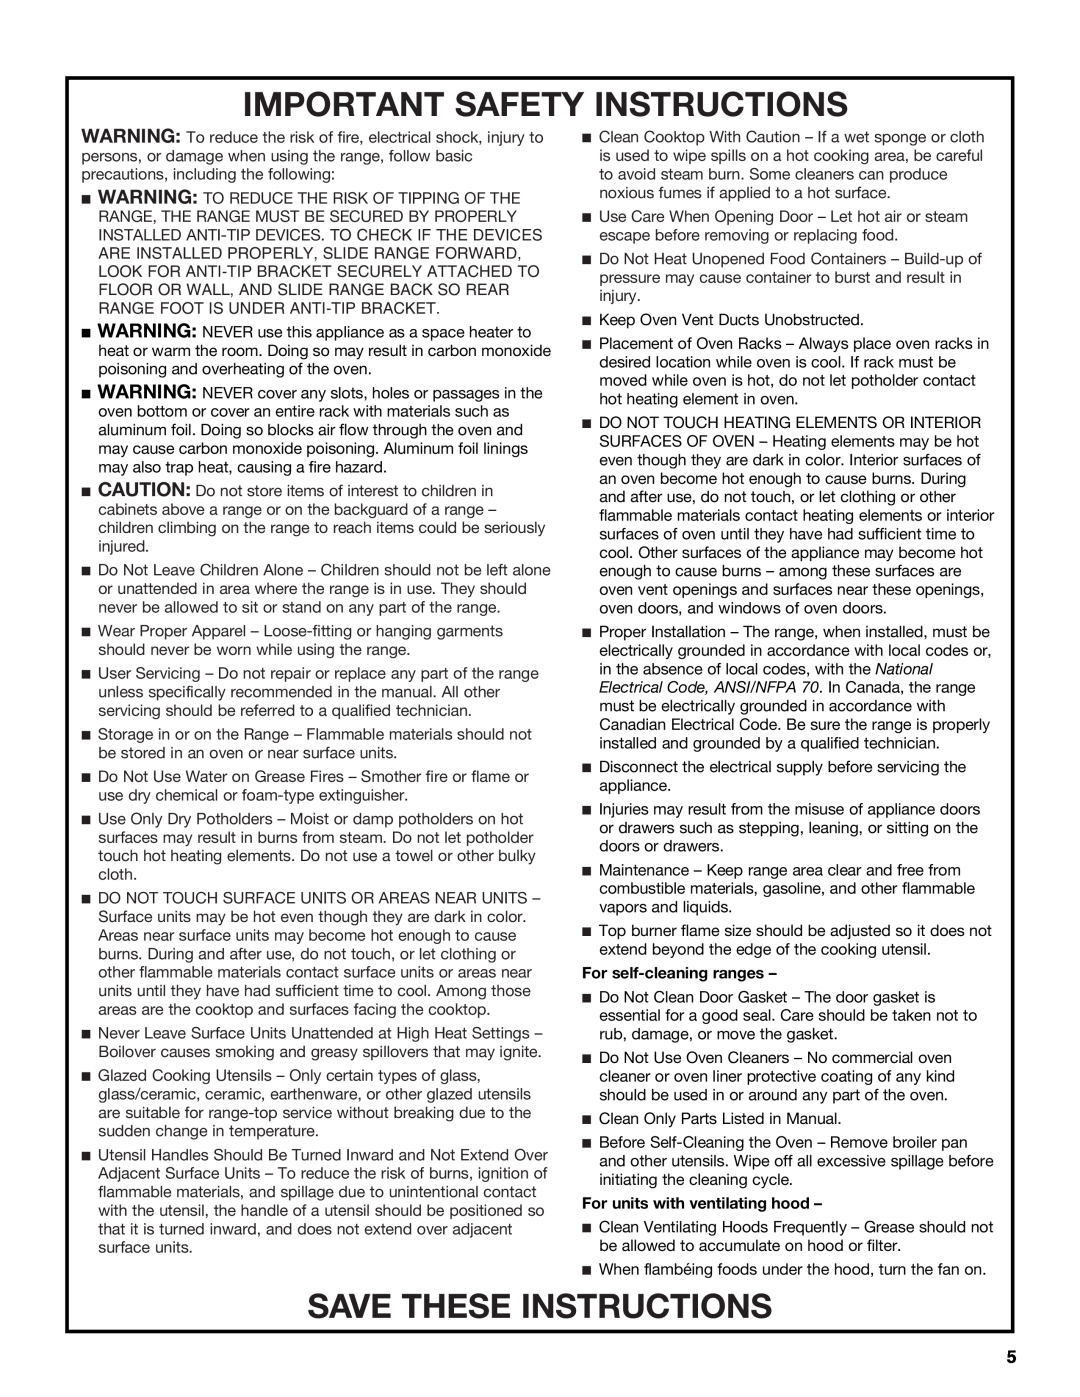 Jenn-Air JDS9865 manual Important Safety Instructions, Save These Instructions, For self-cleaning ranges 